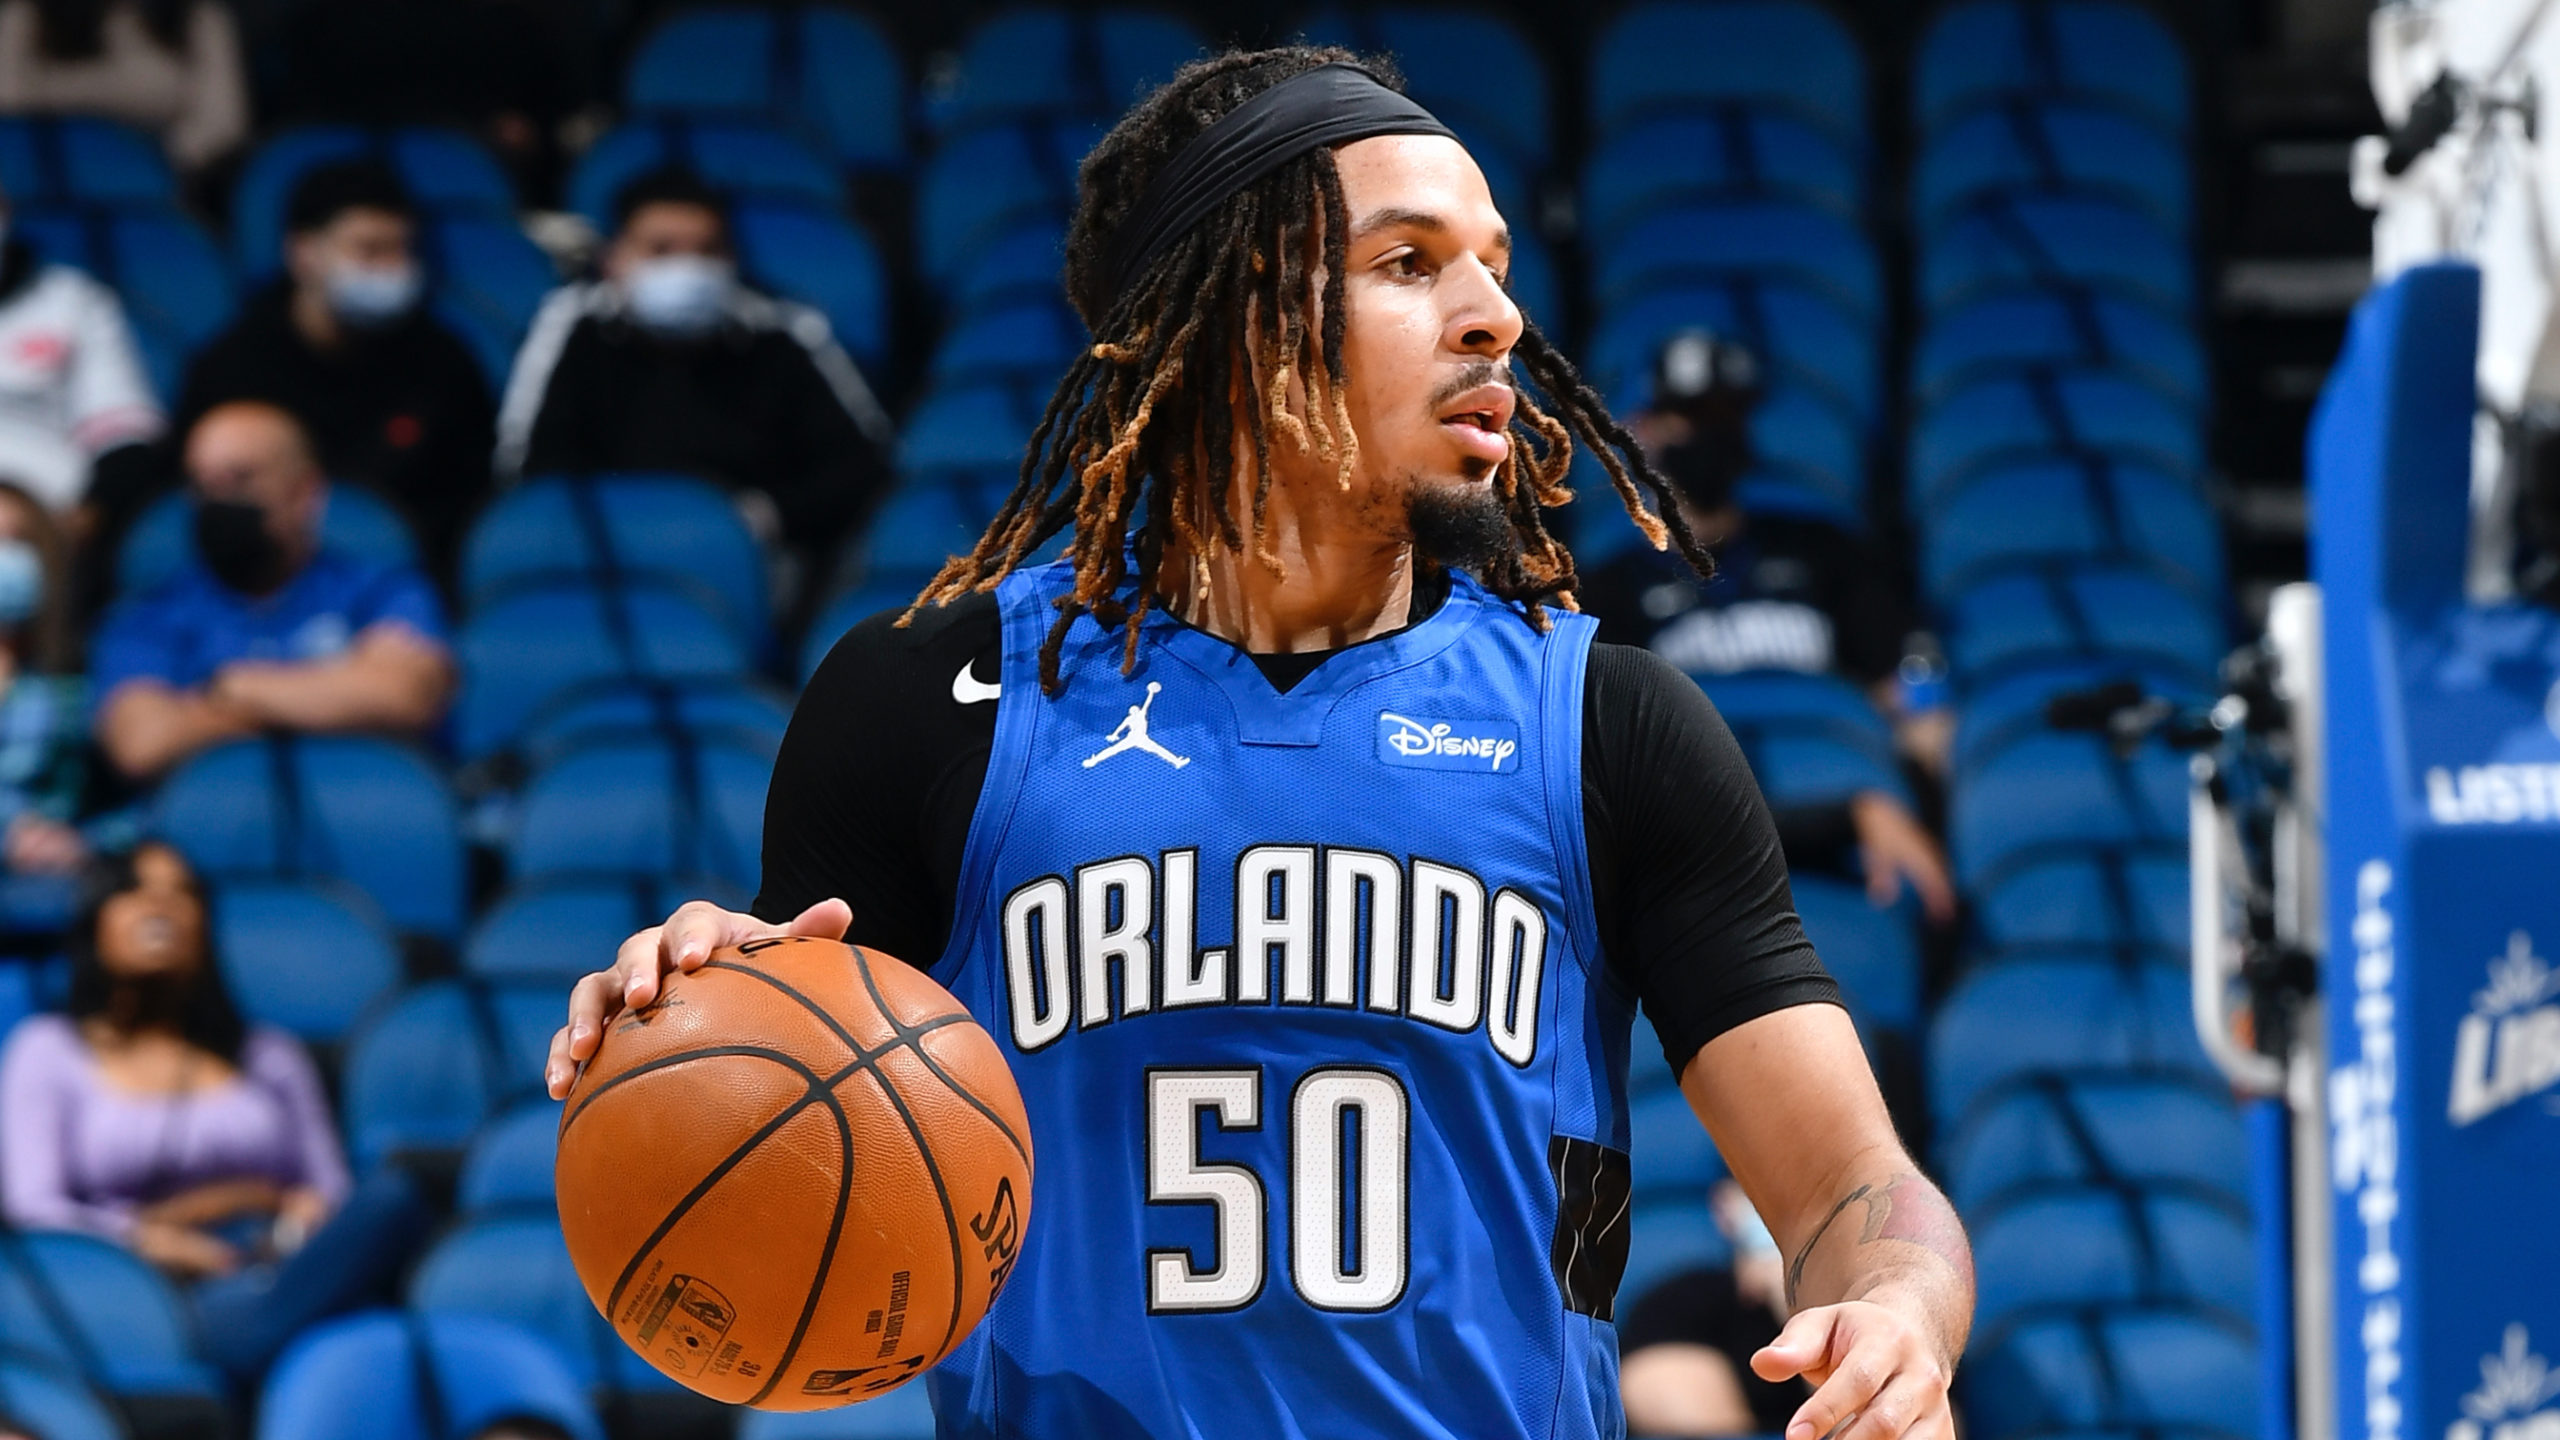 Orlando's Cole Anthony looks to dribble the ball during a Magic game.